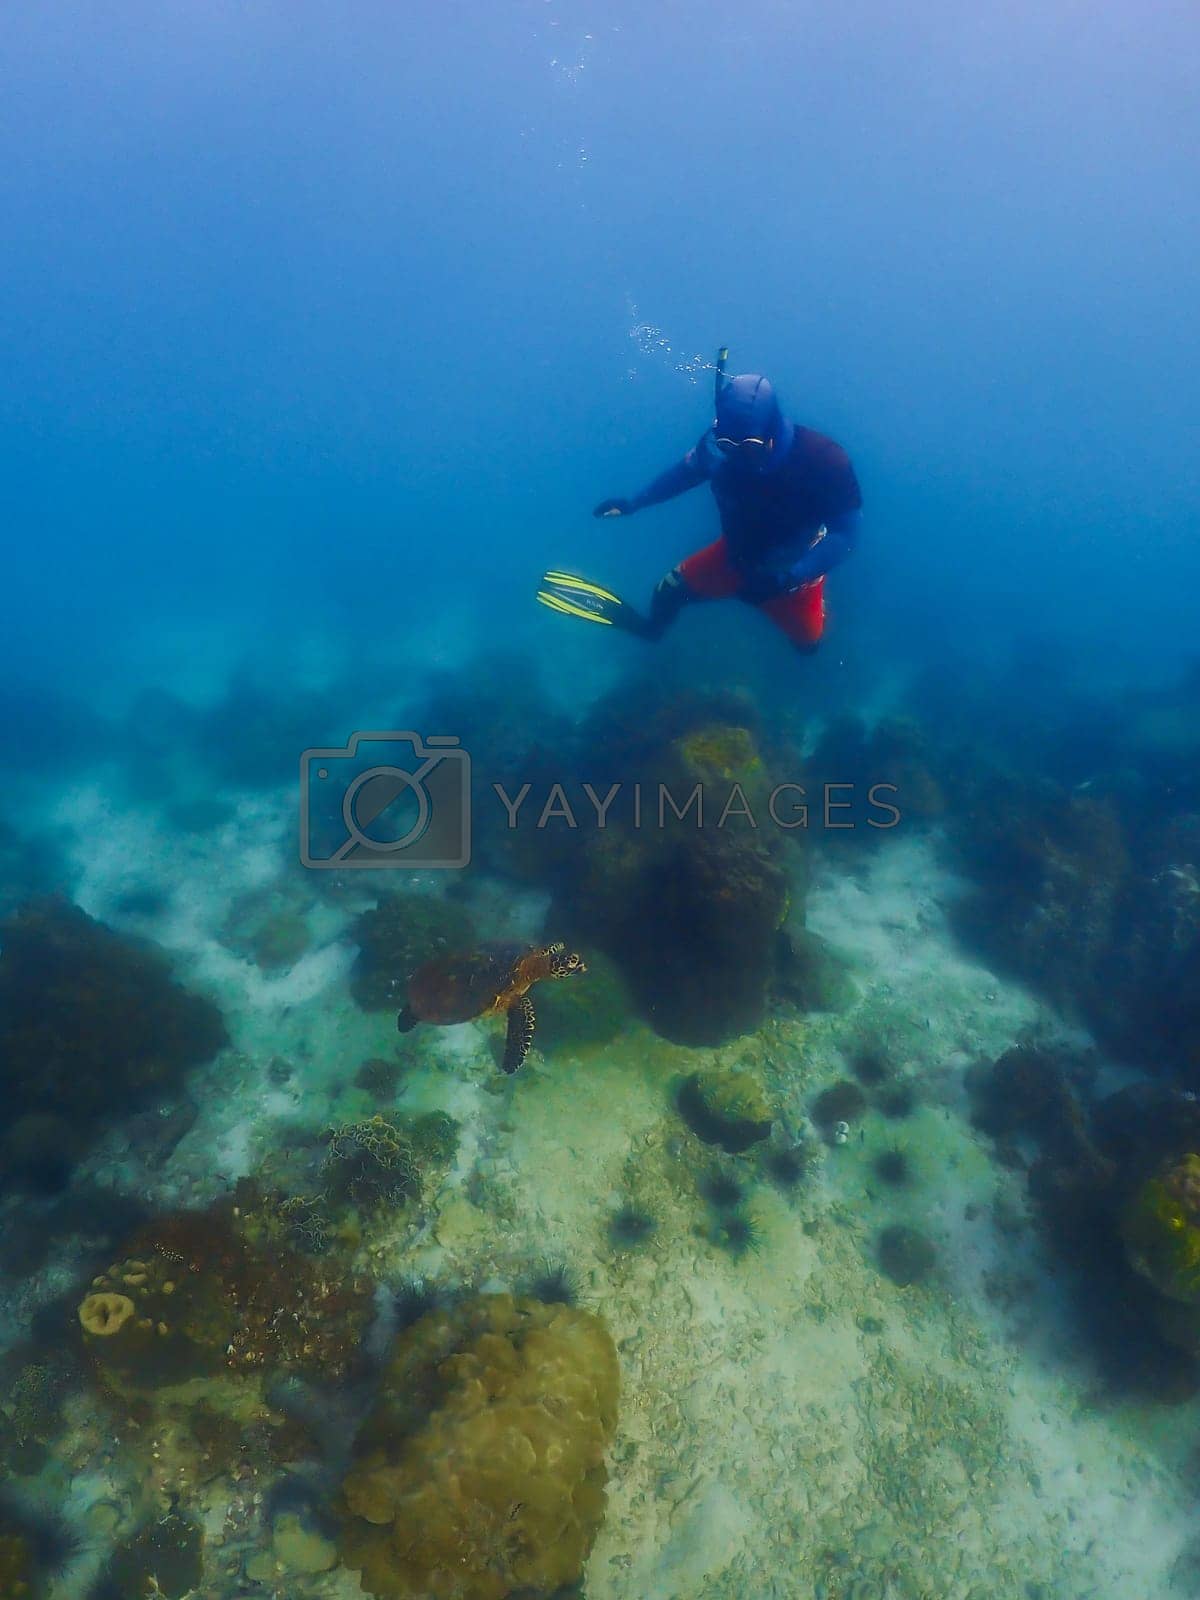 Royalty free image of snorkeling trip at Samaesan Thailand dive underwater with fishes in the coral reef sea pool by fokkebok